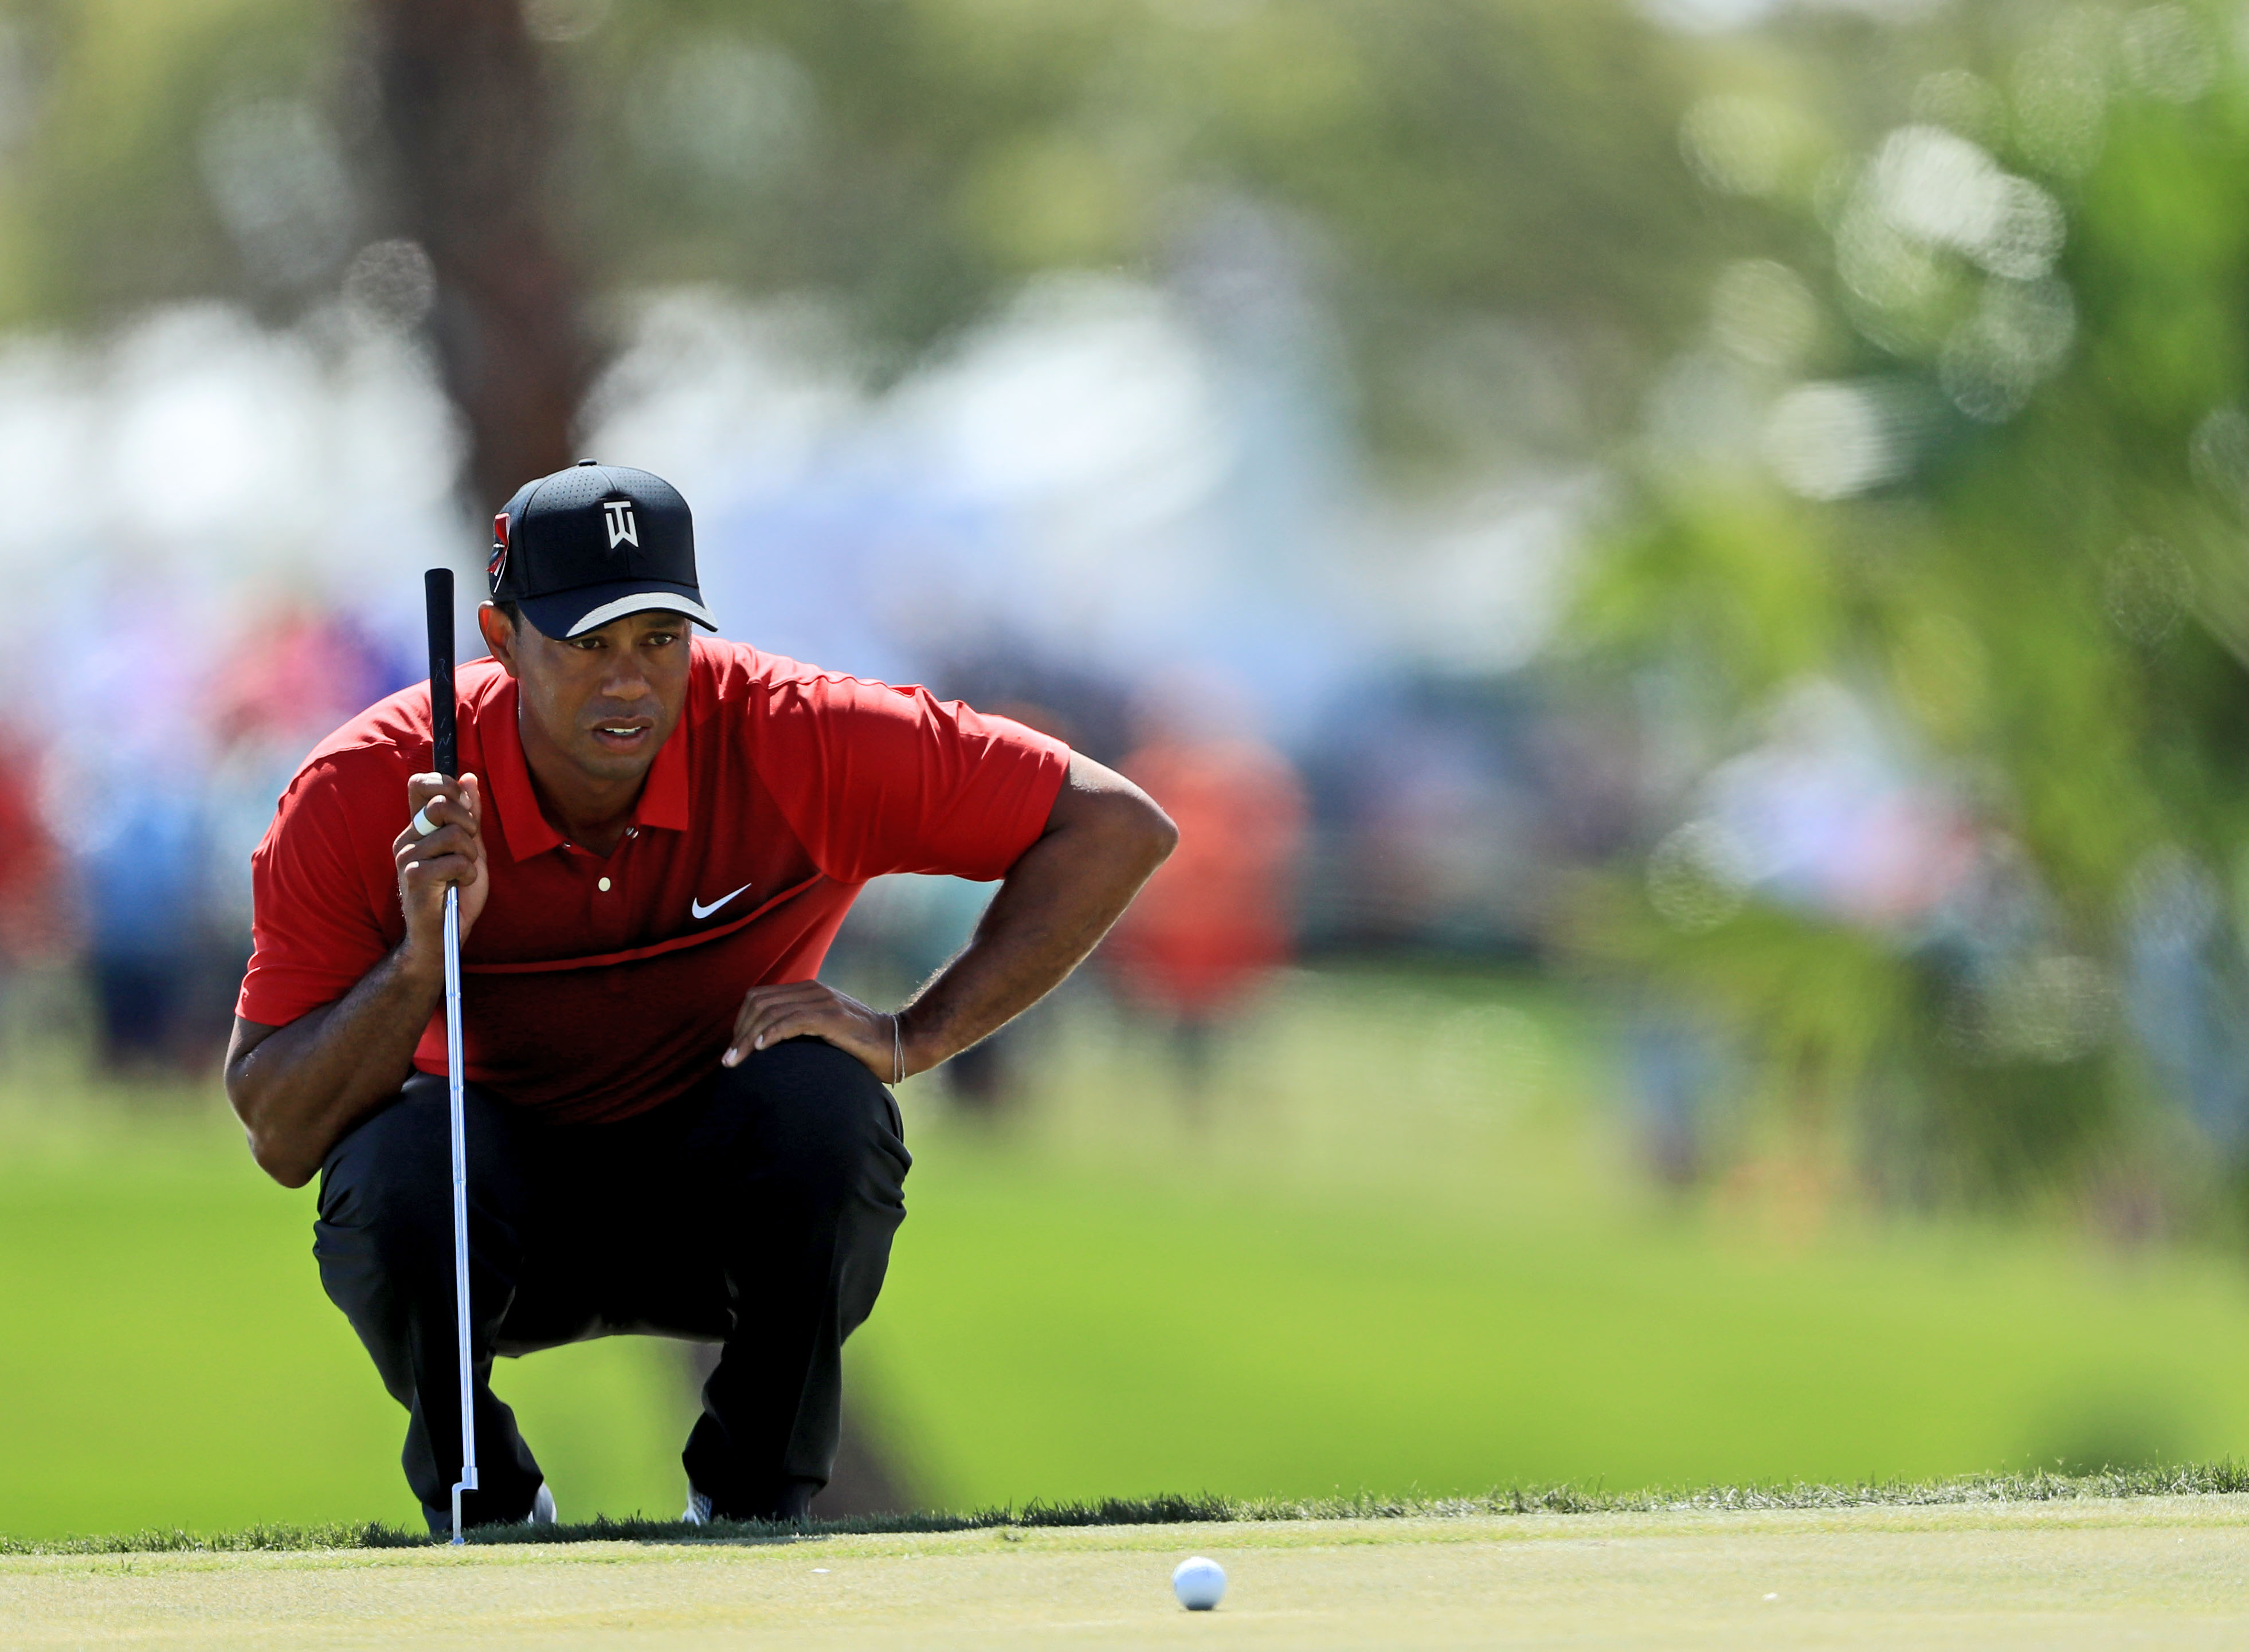 Woods Finishes 12th at Honda Classic - Newsfeed